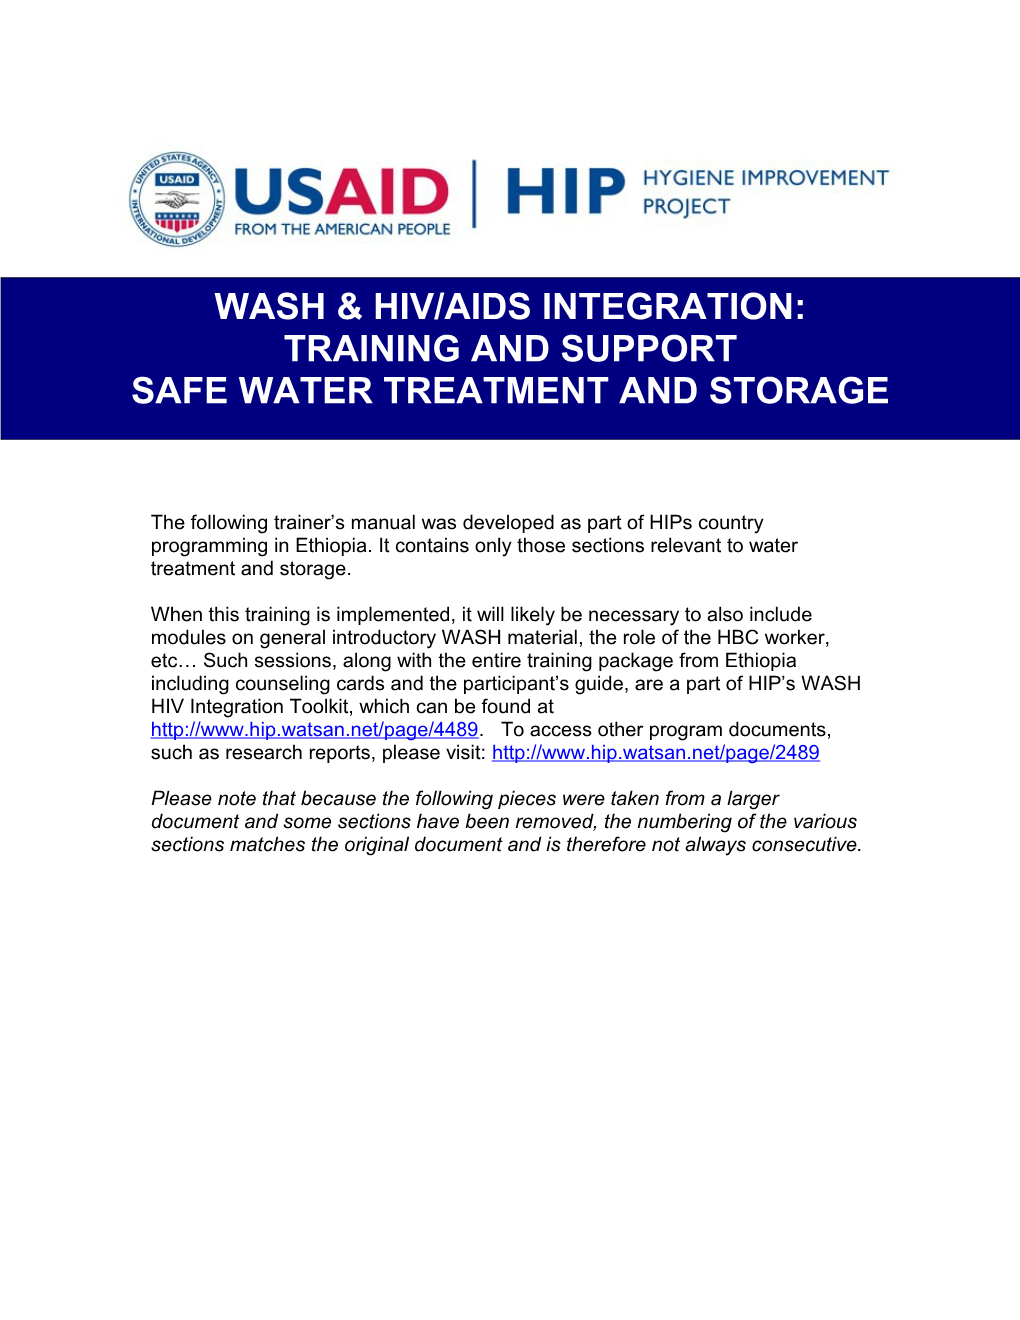 Integrating Water, Sanitation, and Hygiene Into Hiv Programs in Ethiopia